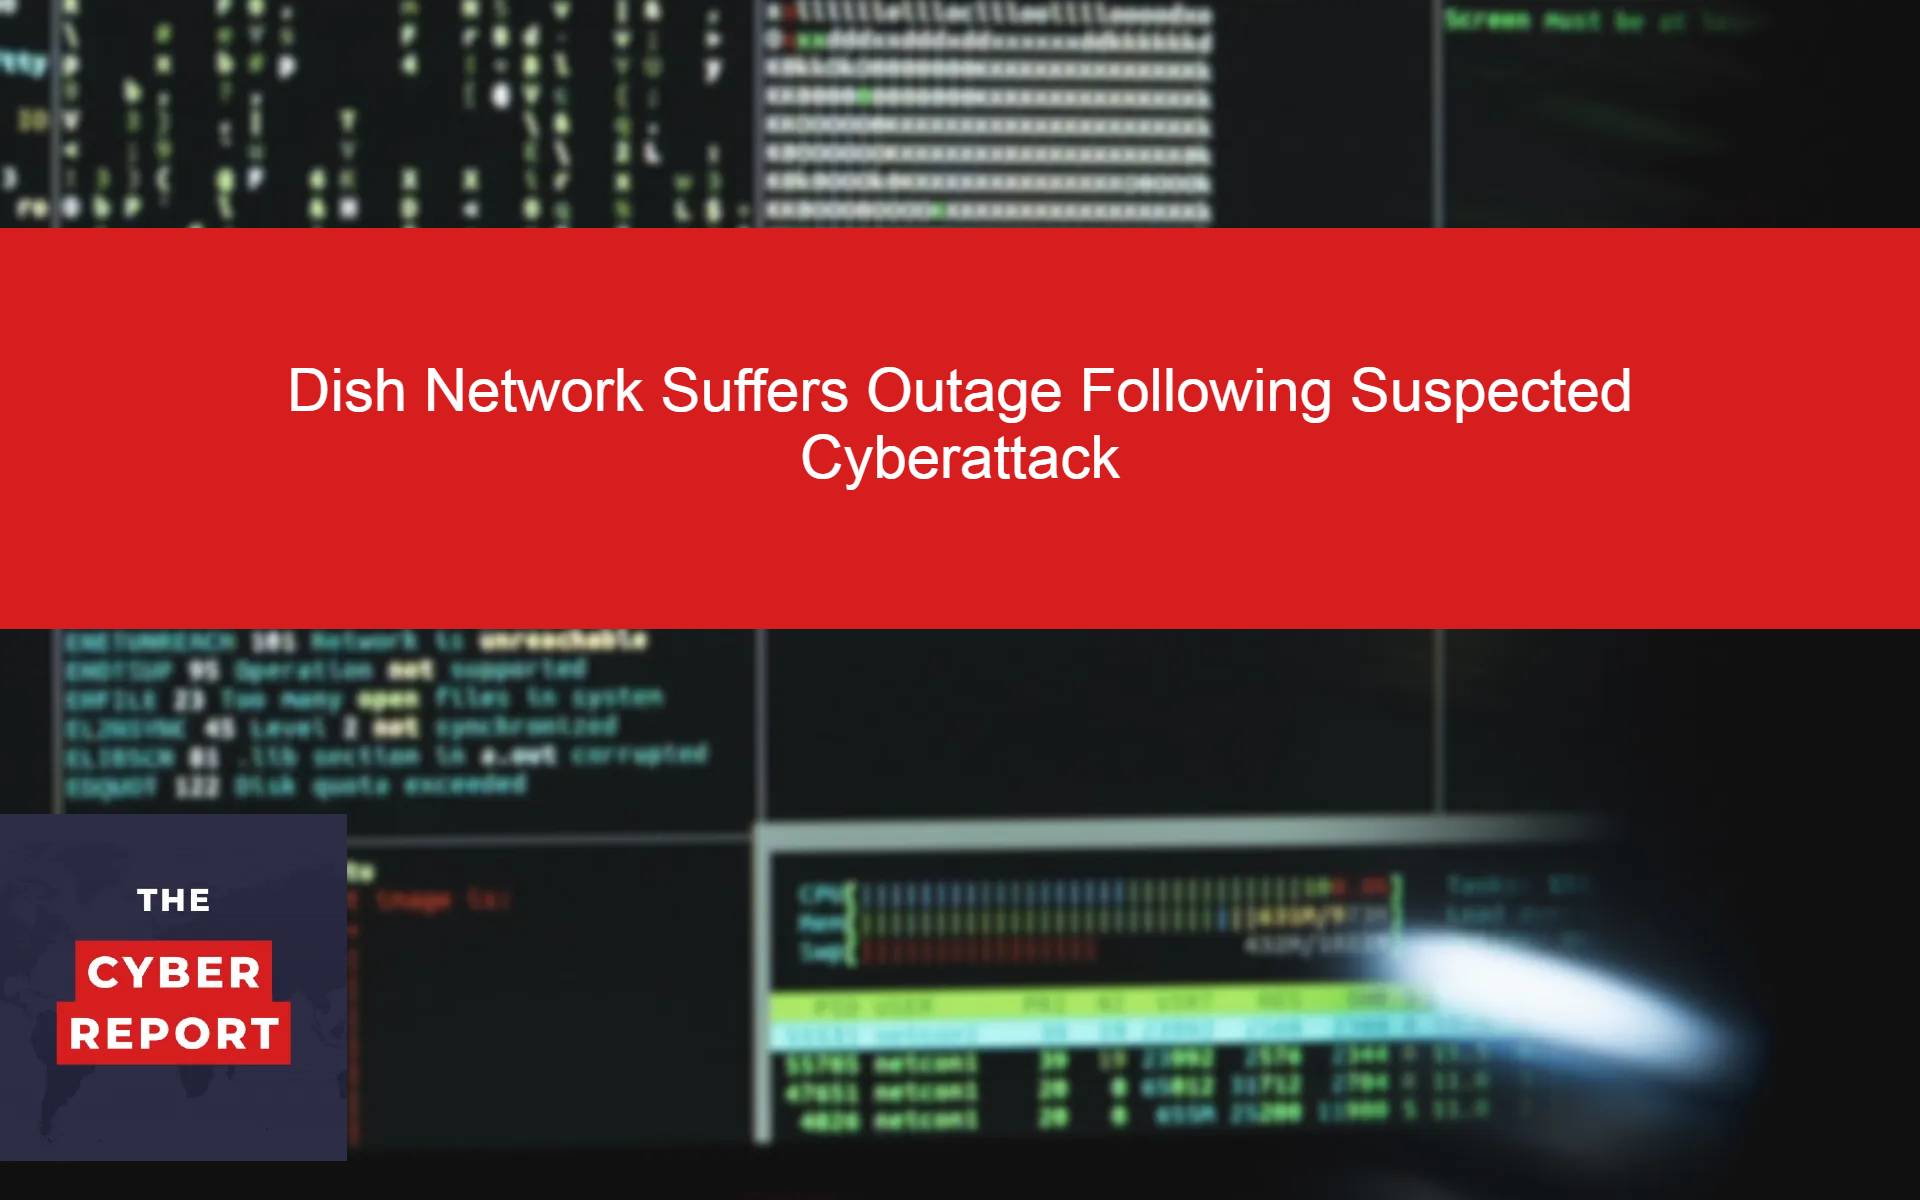 Dish Network Suffers Outage Following Suspected Cyberattack